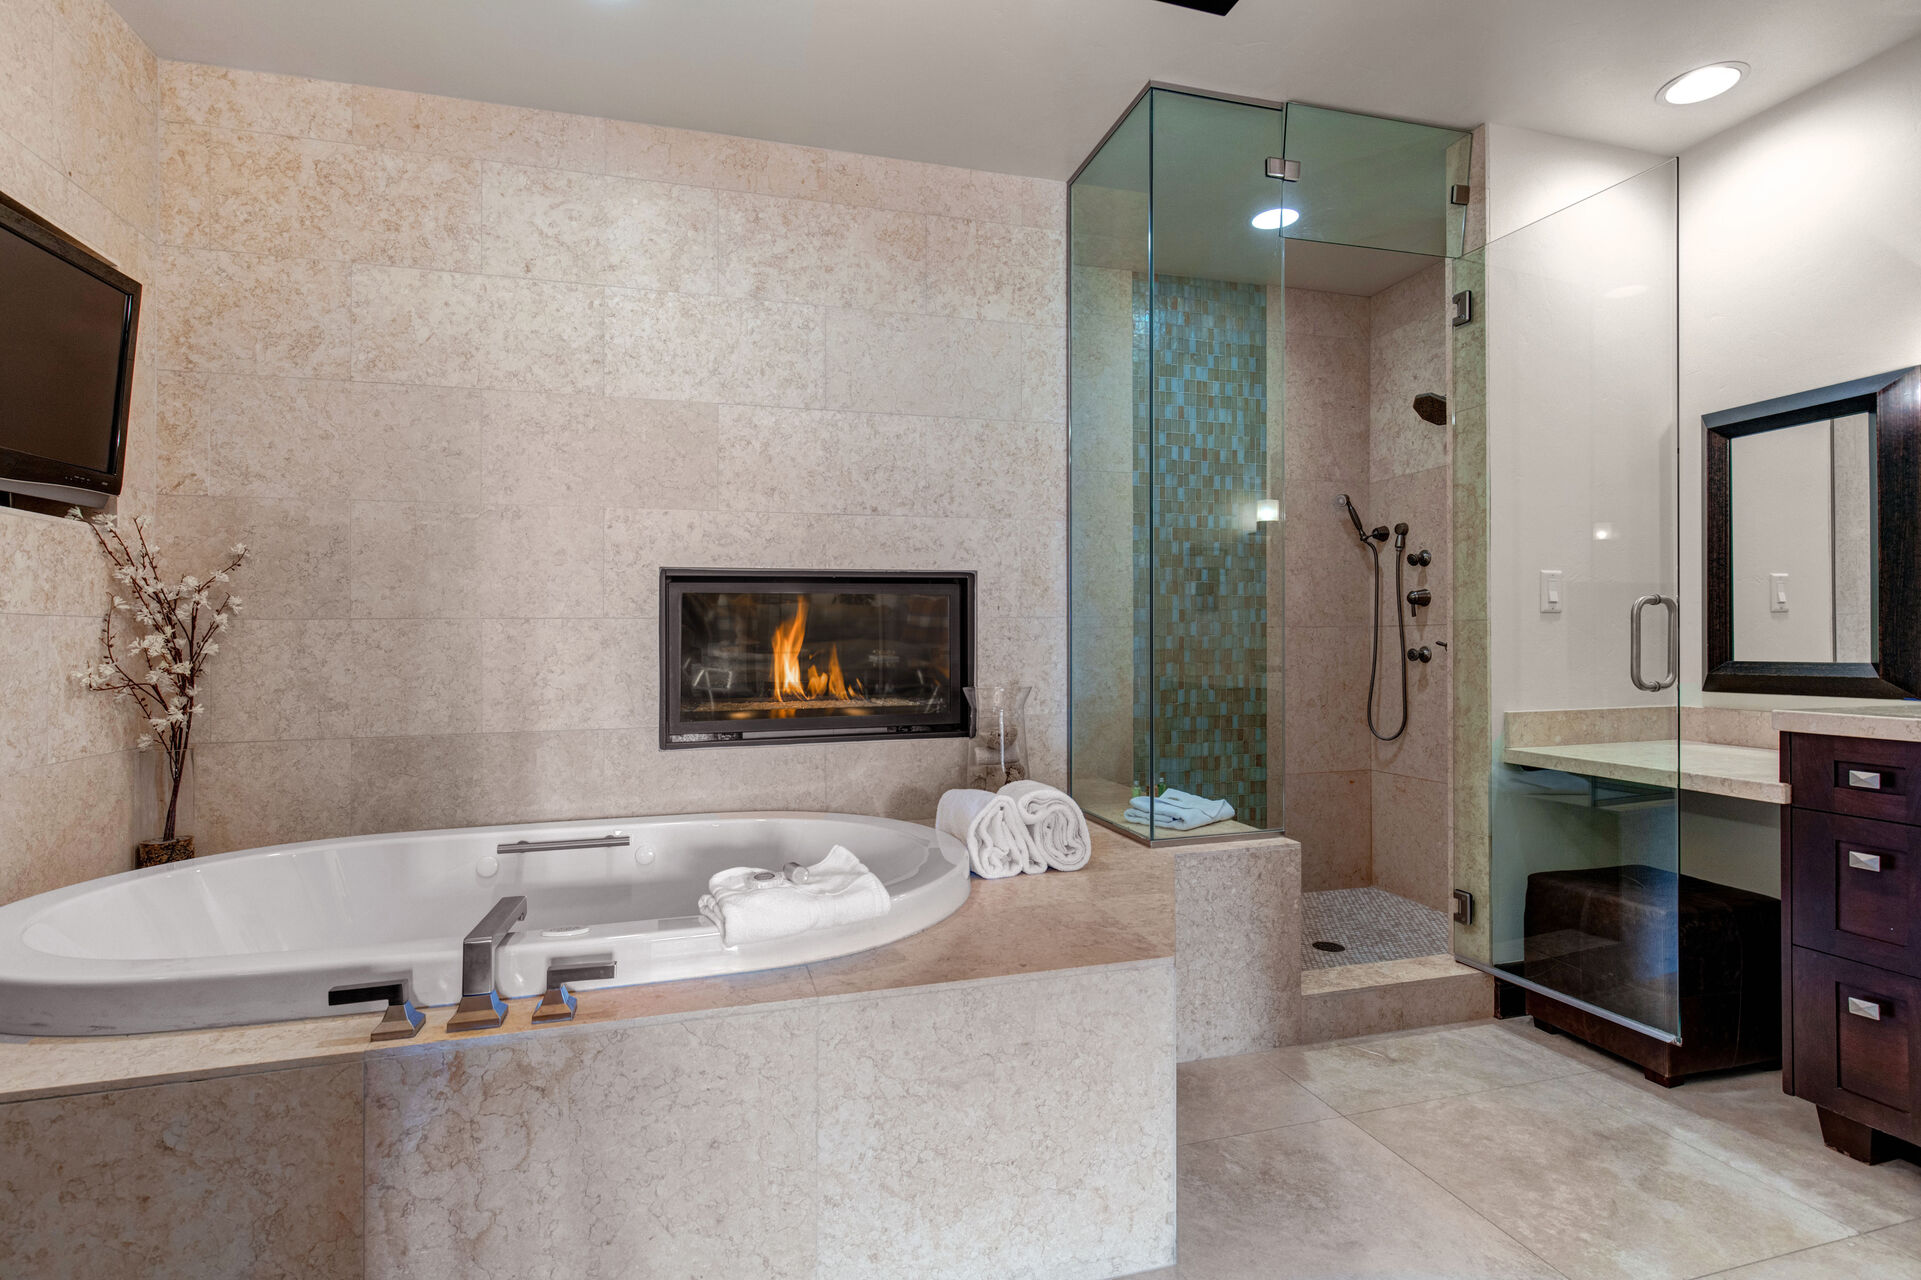 Grand Master Bath with Separate Vanities, Jetted Tub, Gas Fireplace, and a Separate Tile Shower